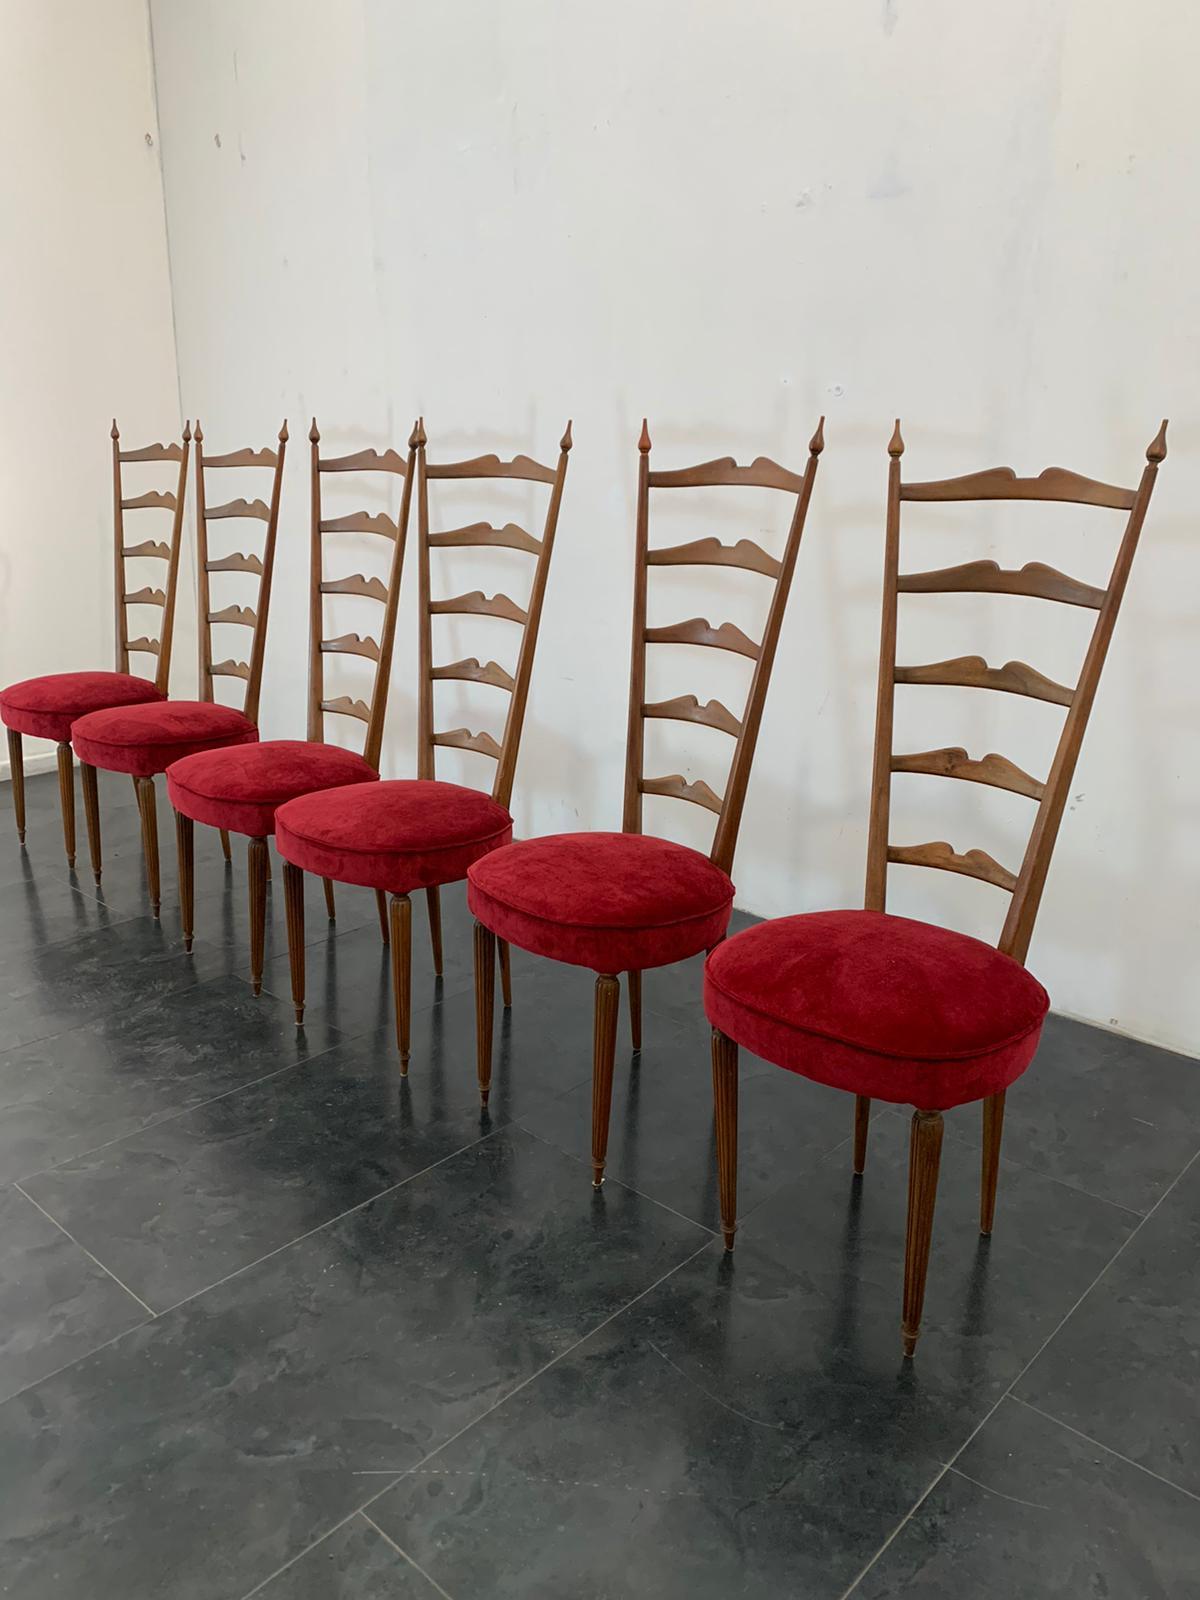 6 Highbacked chairs by Paolo Buffa 1950s.